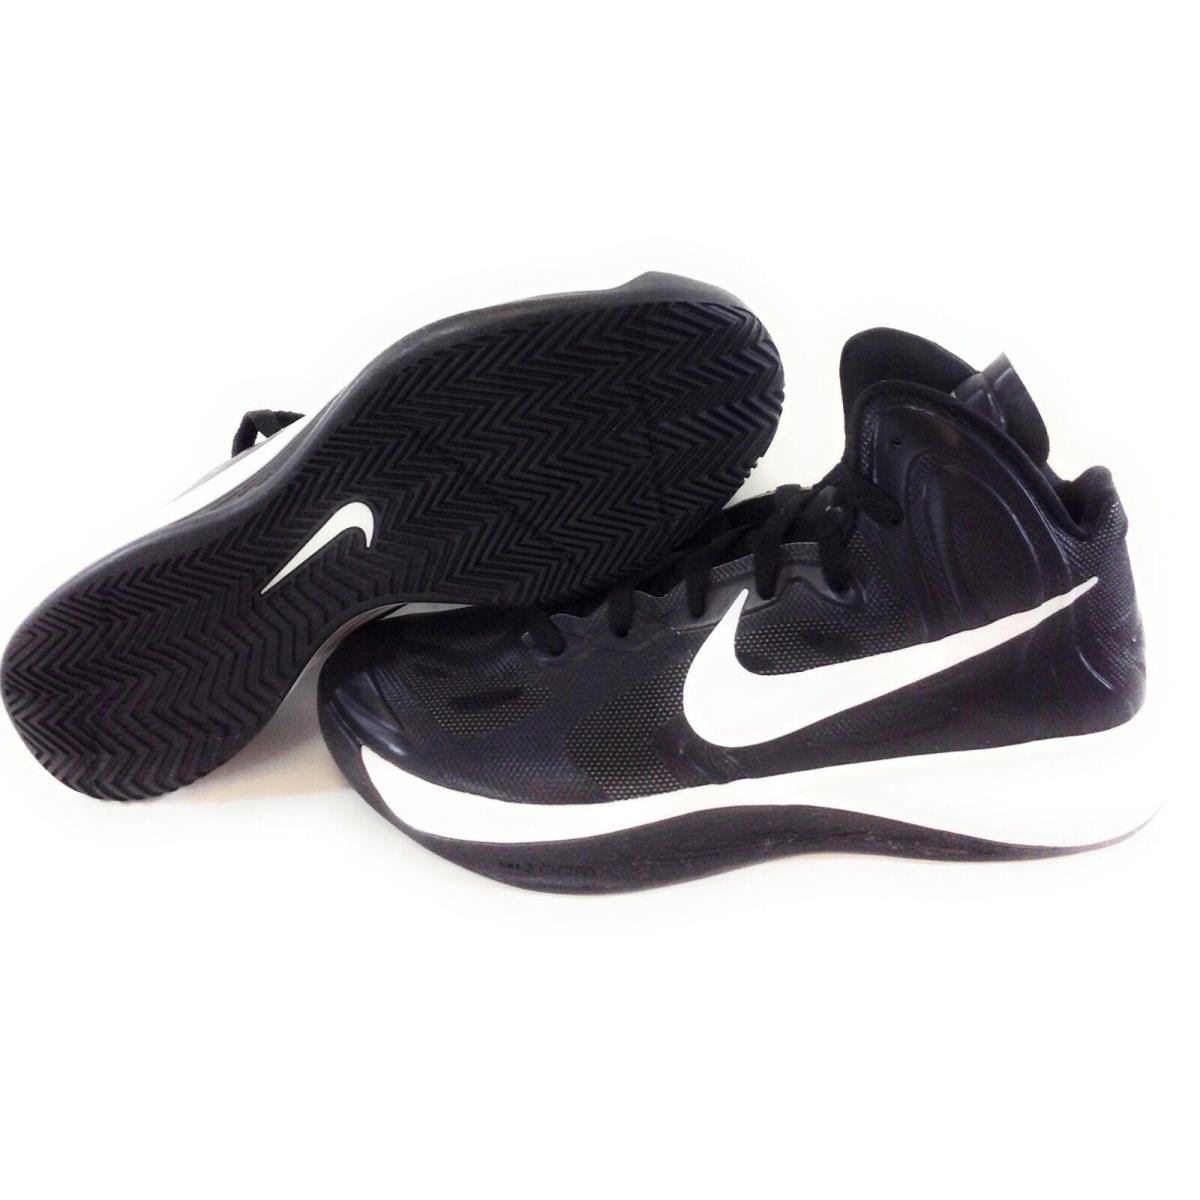 Womens Nike Hyperfuse TB 525021 001 Black Basketball 2012 DS Sneakers Shoes